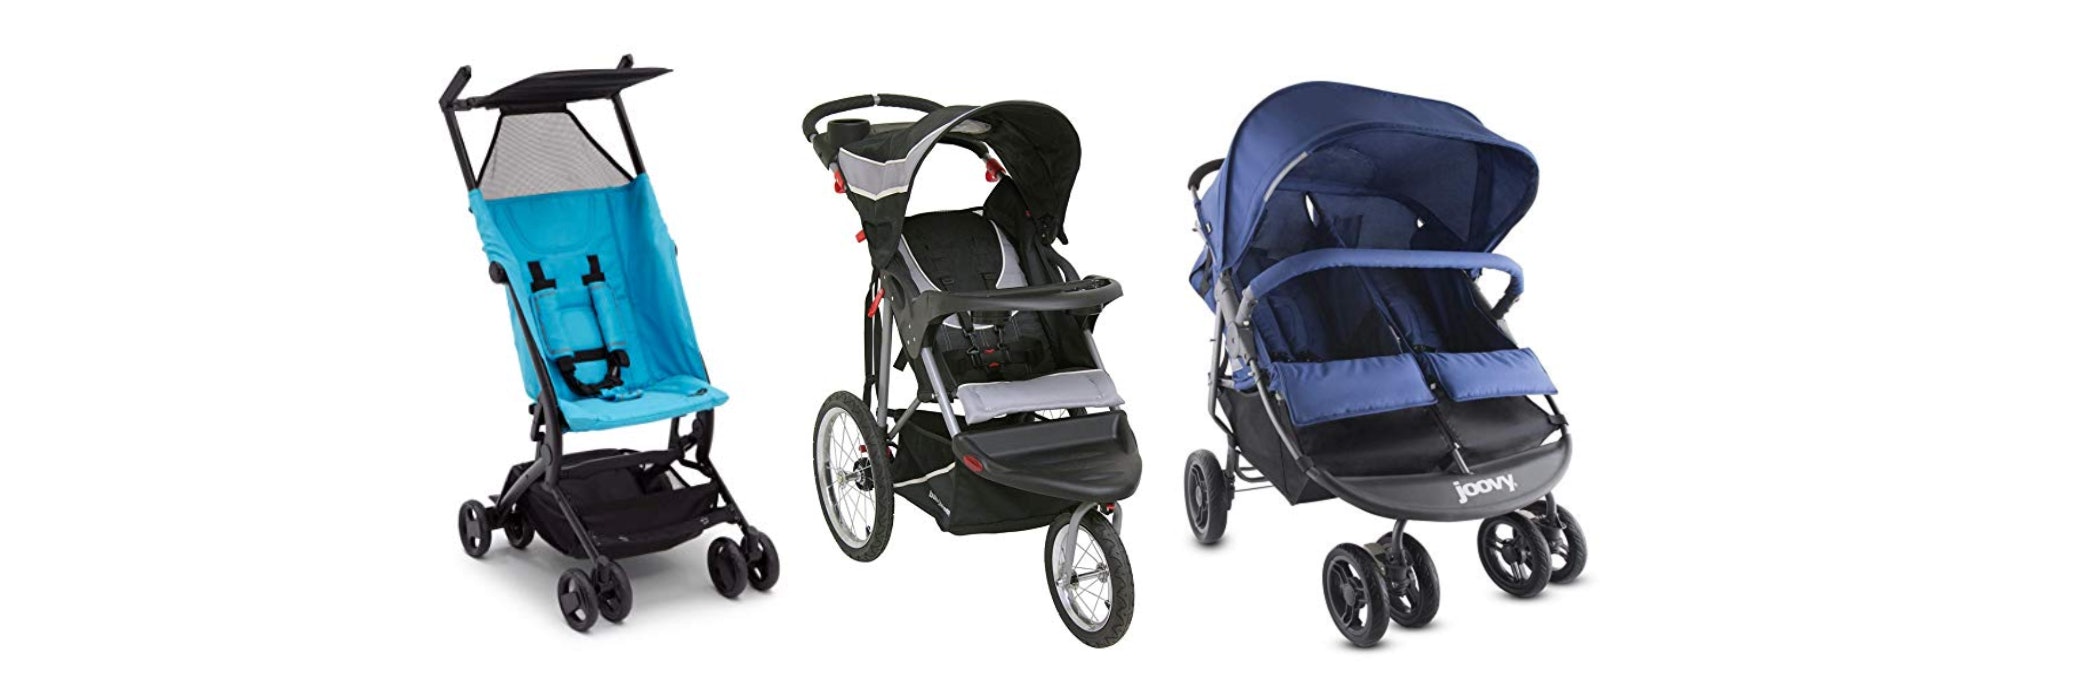 amazon strollers for toddlers